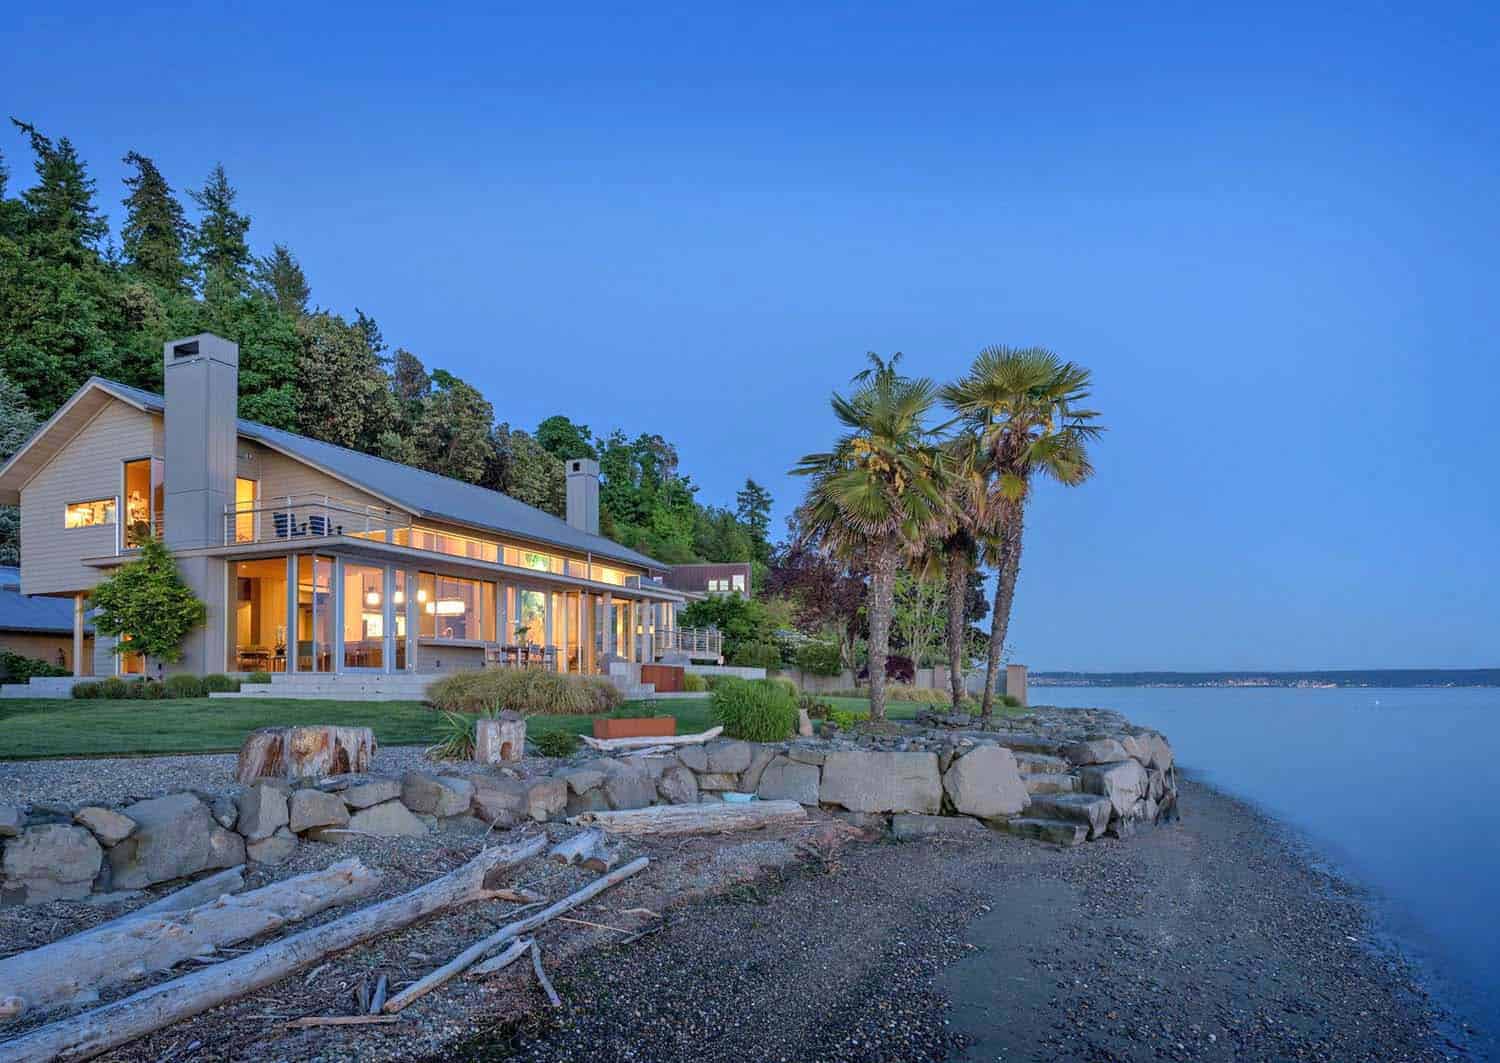 This beachfront home overlooking the Puget Sound gets a fabulous renovation